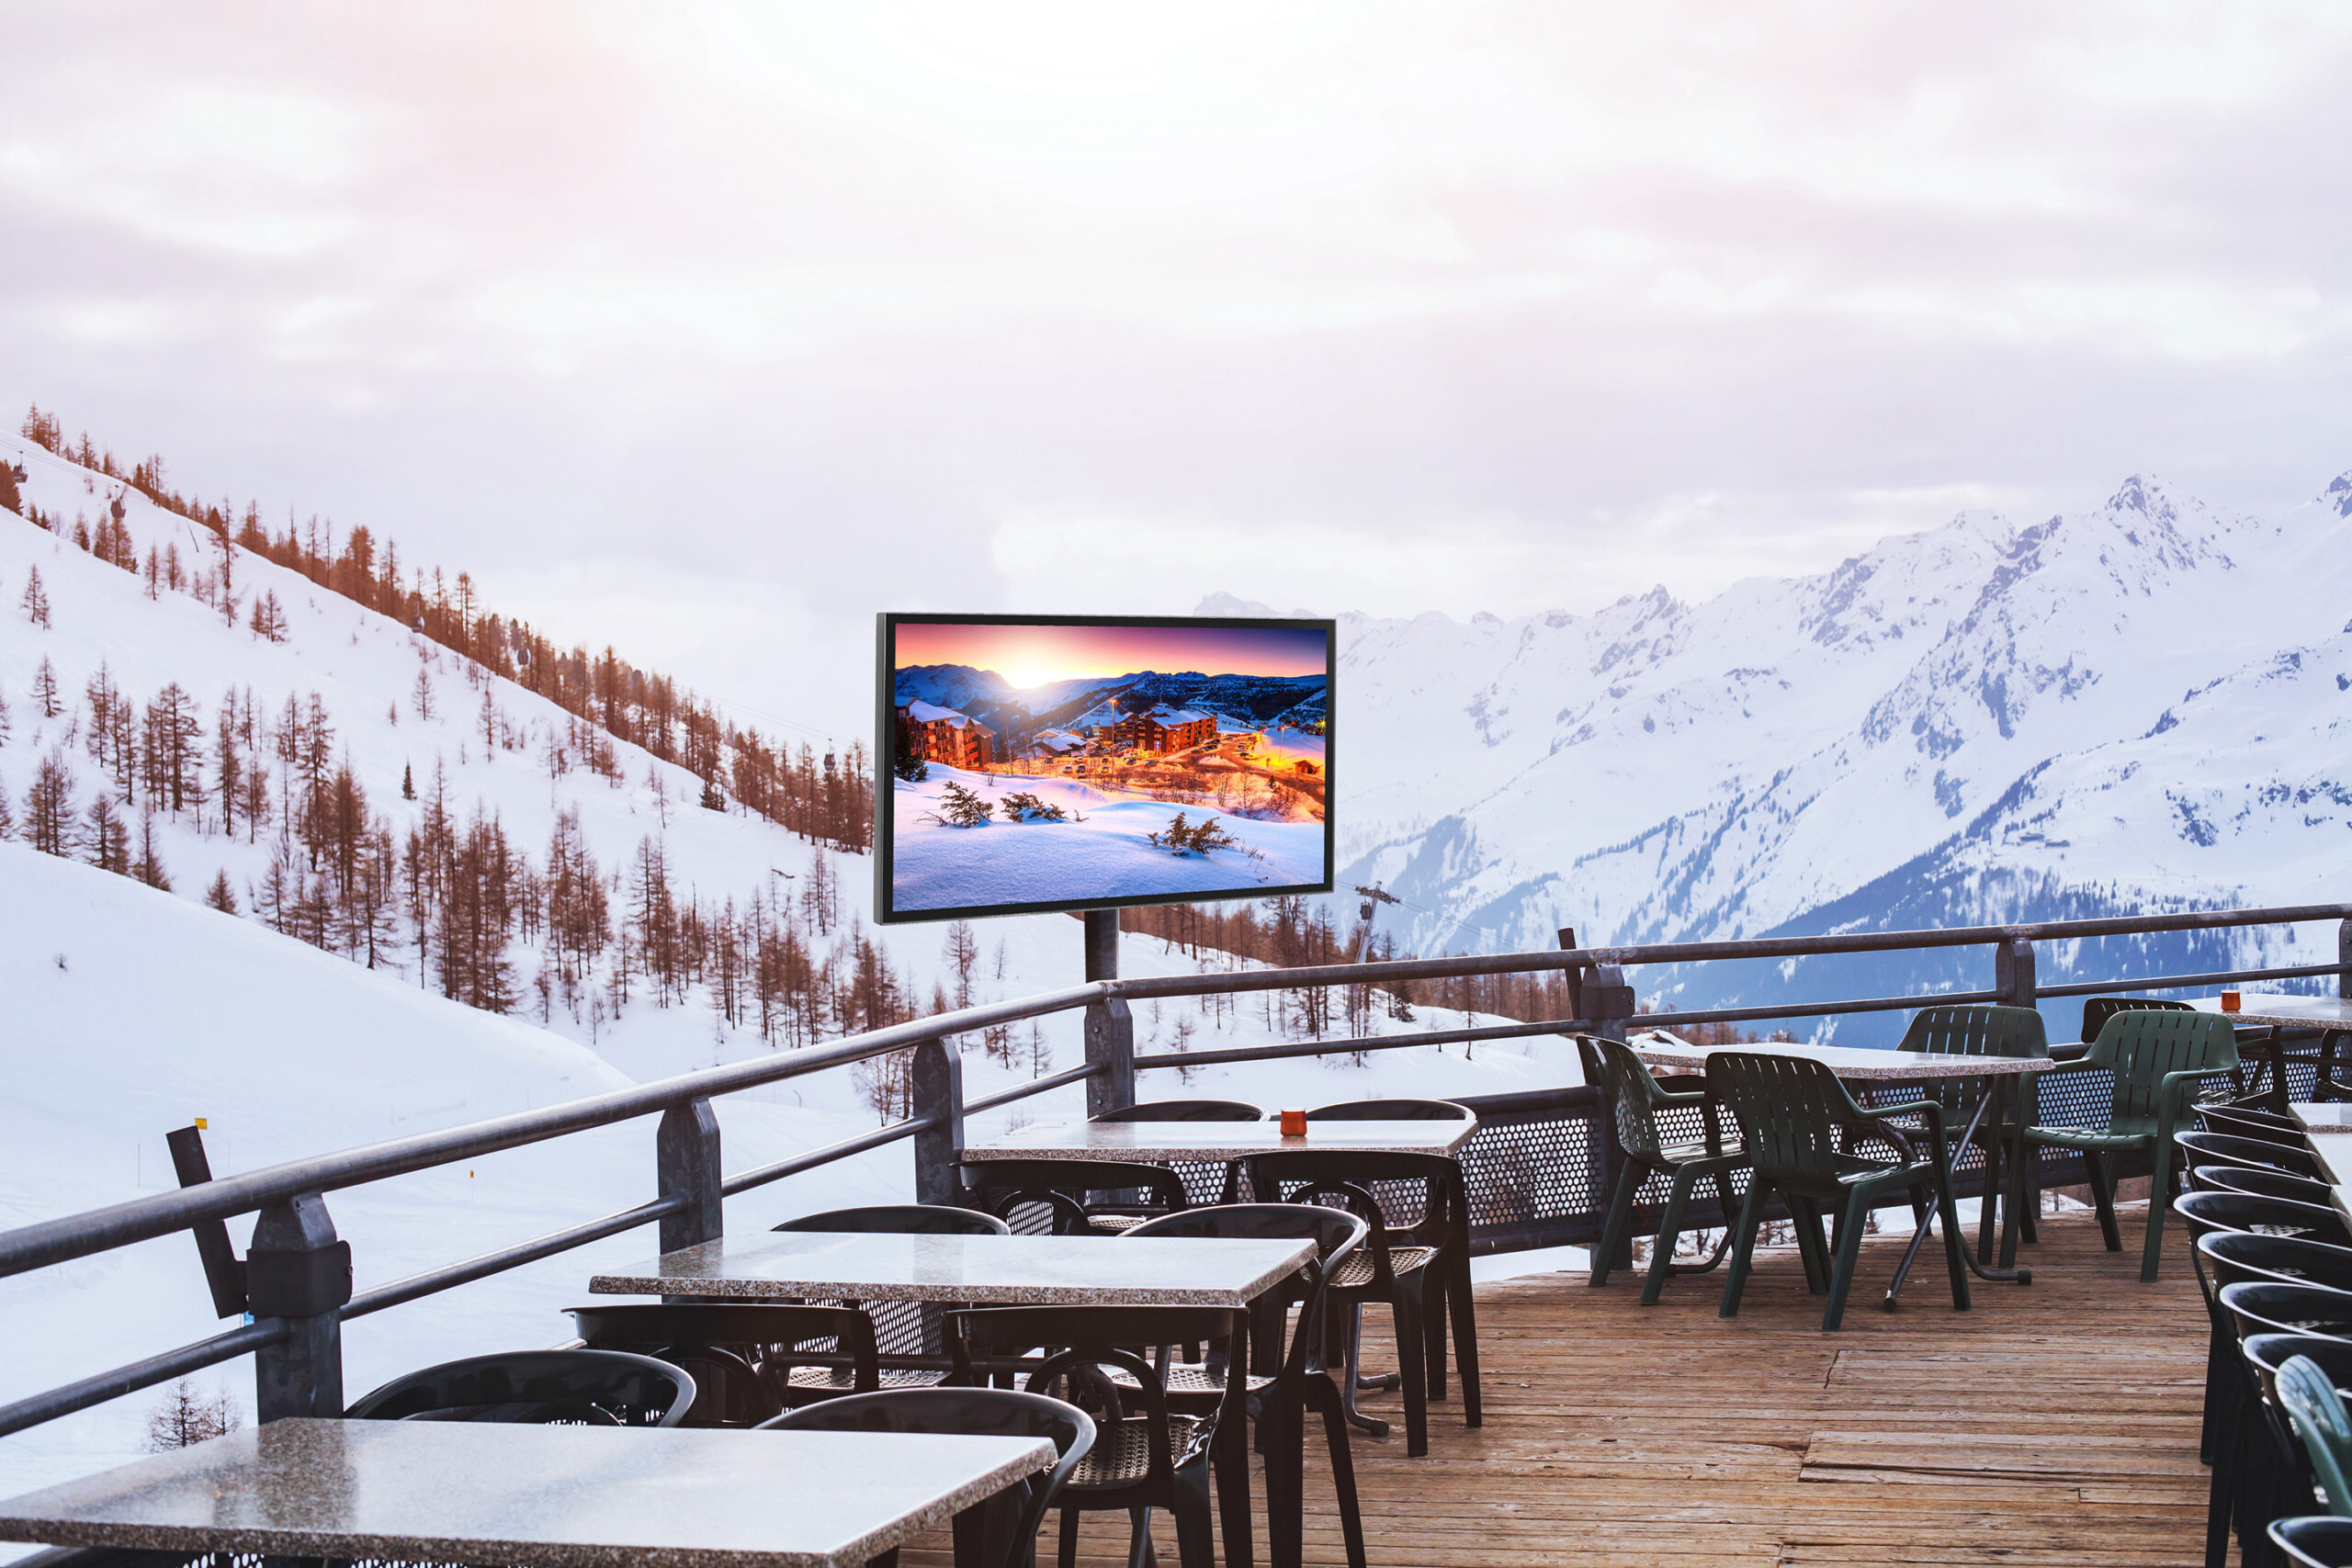 Xtreme High Bright Outdoor Display winter digital signage